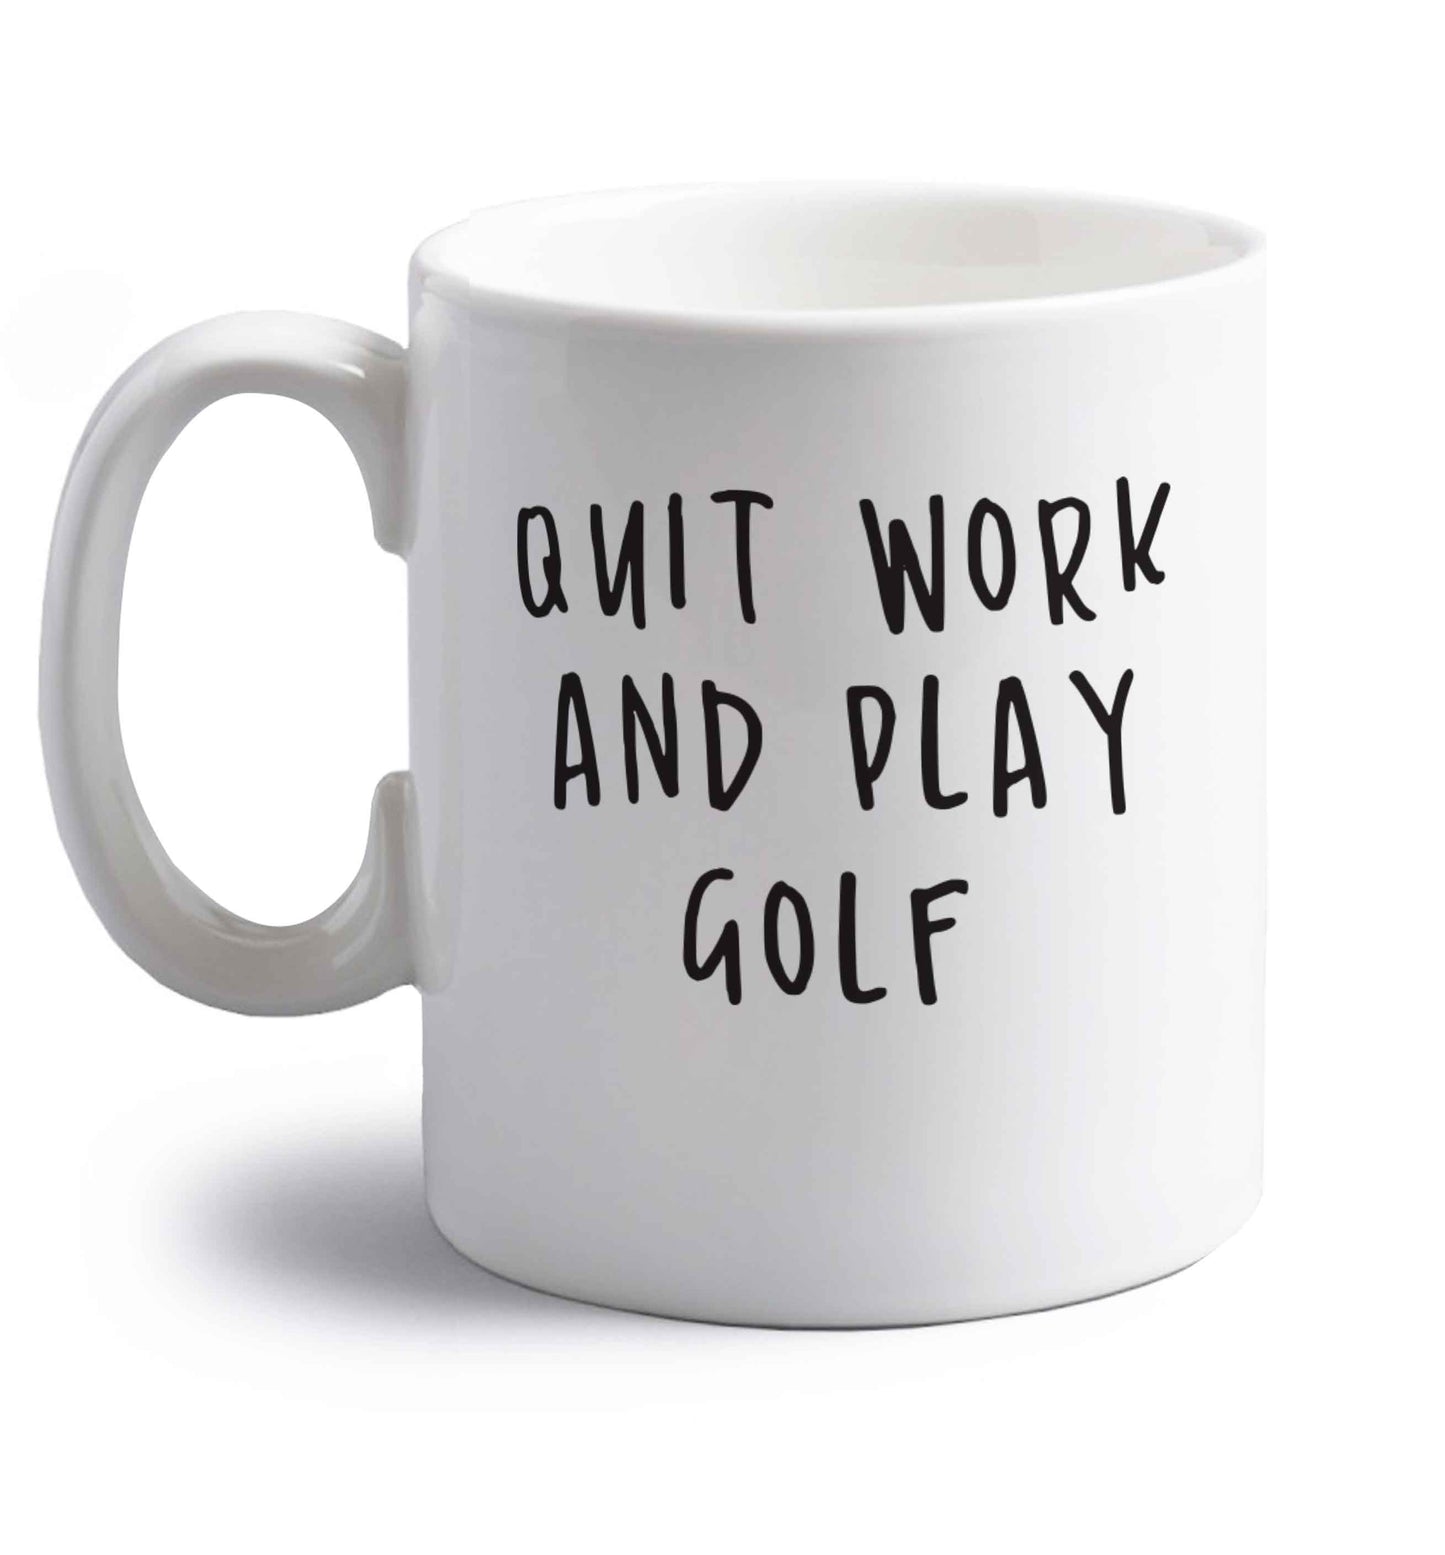 Quit work and play golf right handed white ceramic mug 